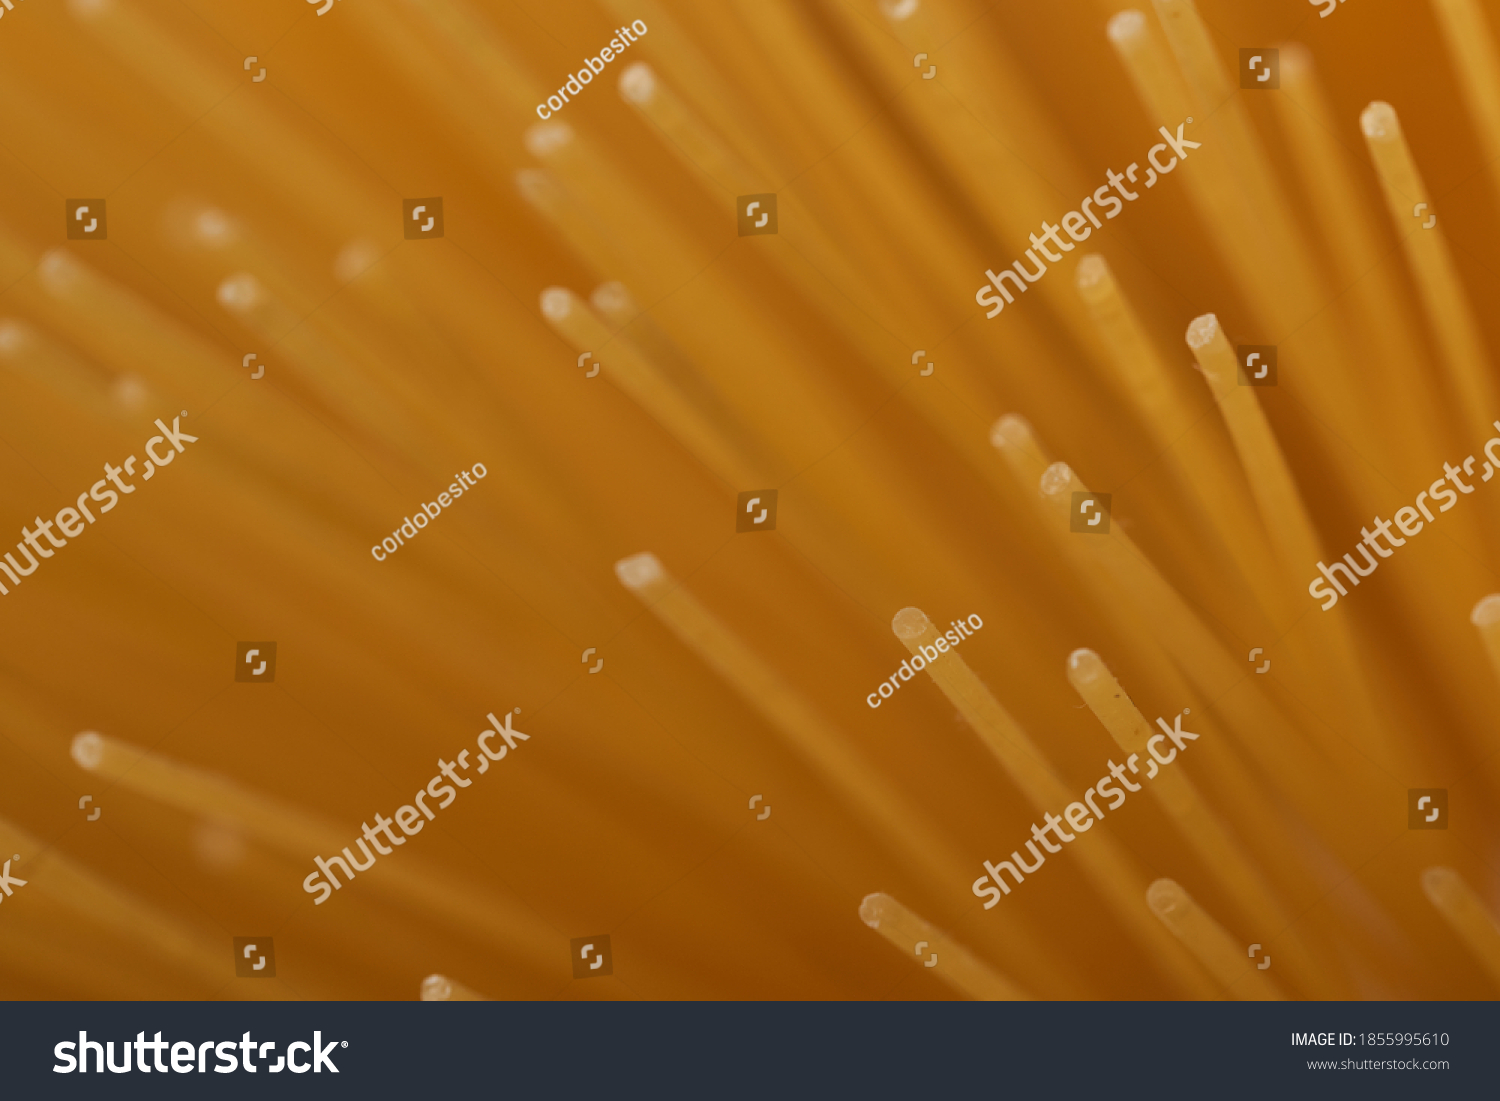 
A macro photograph of several unboiled spaghetti #1855995610